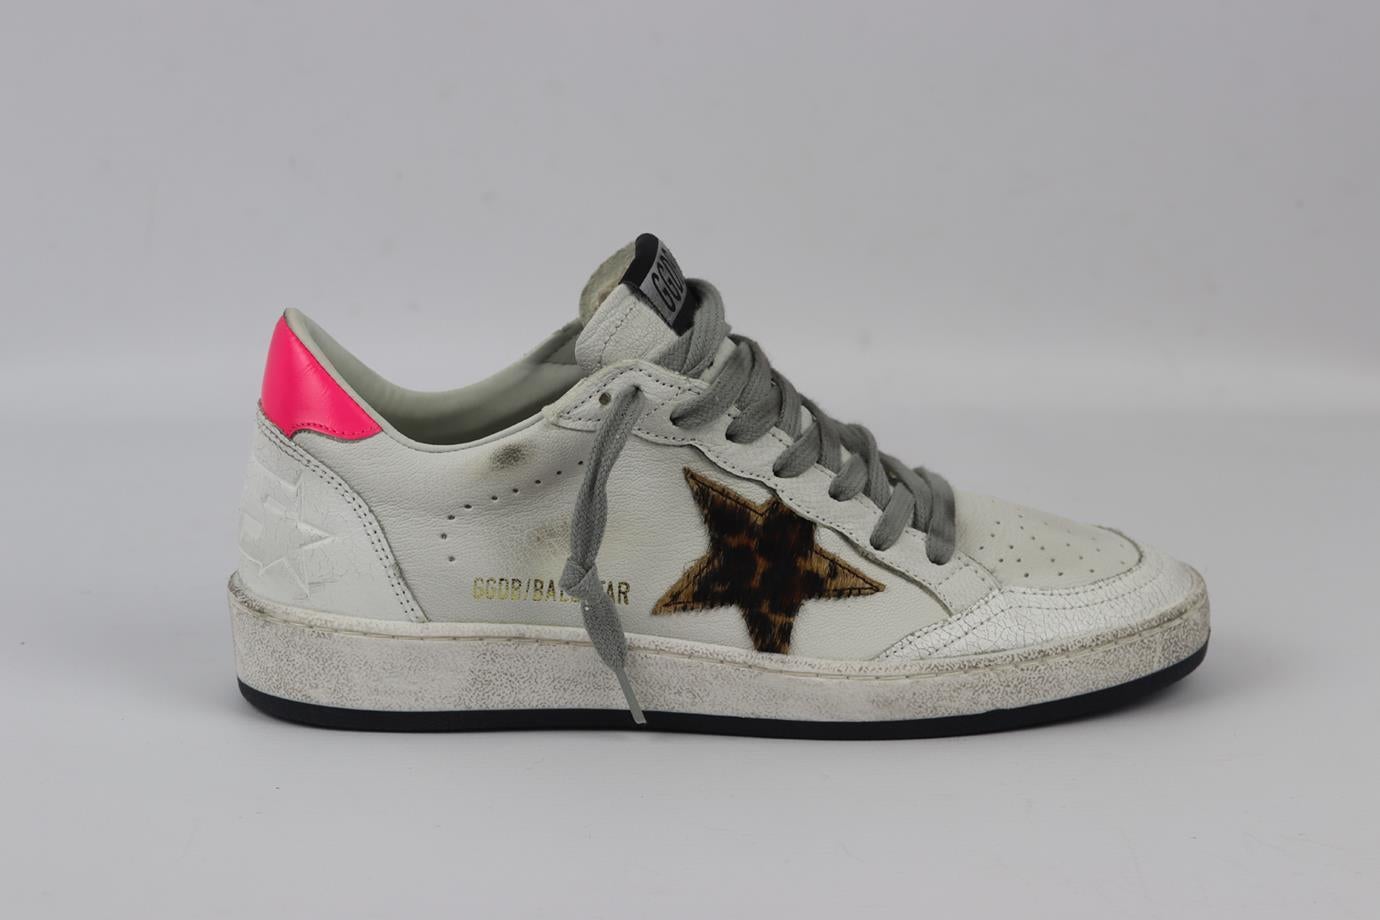 Golden Goose Deluxe Brand Ballstar calf hair and leather sneakers. Ecru, white, pink, grey, brown and black. Lace up fastening at front. Does not come with dustbag or box. Size: EU 38 (UK 5, US 8). Insole: 9.8 in. Heel Height: 1.2 in. New without box